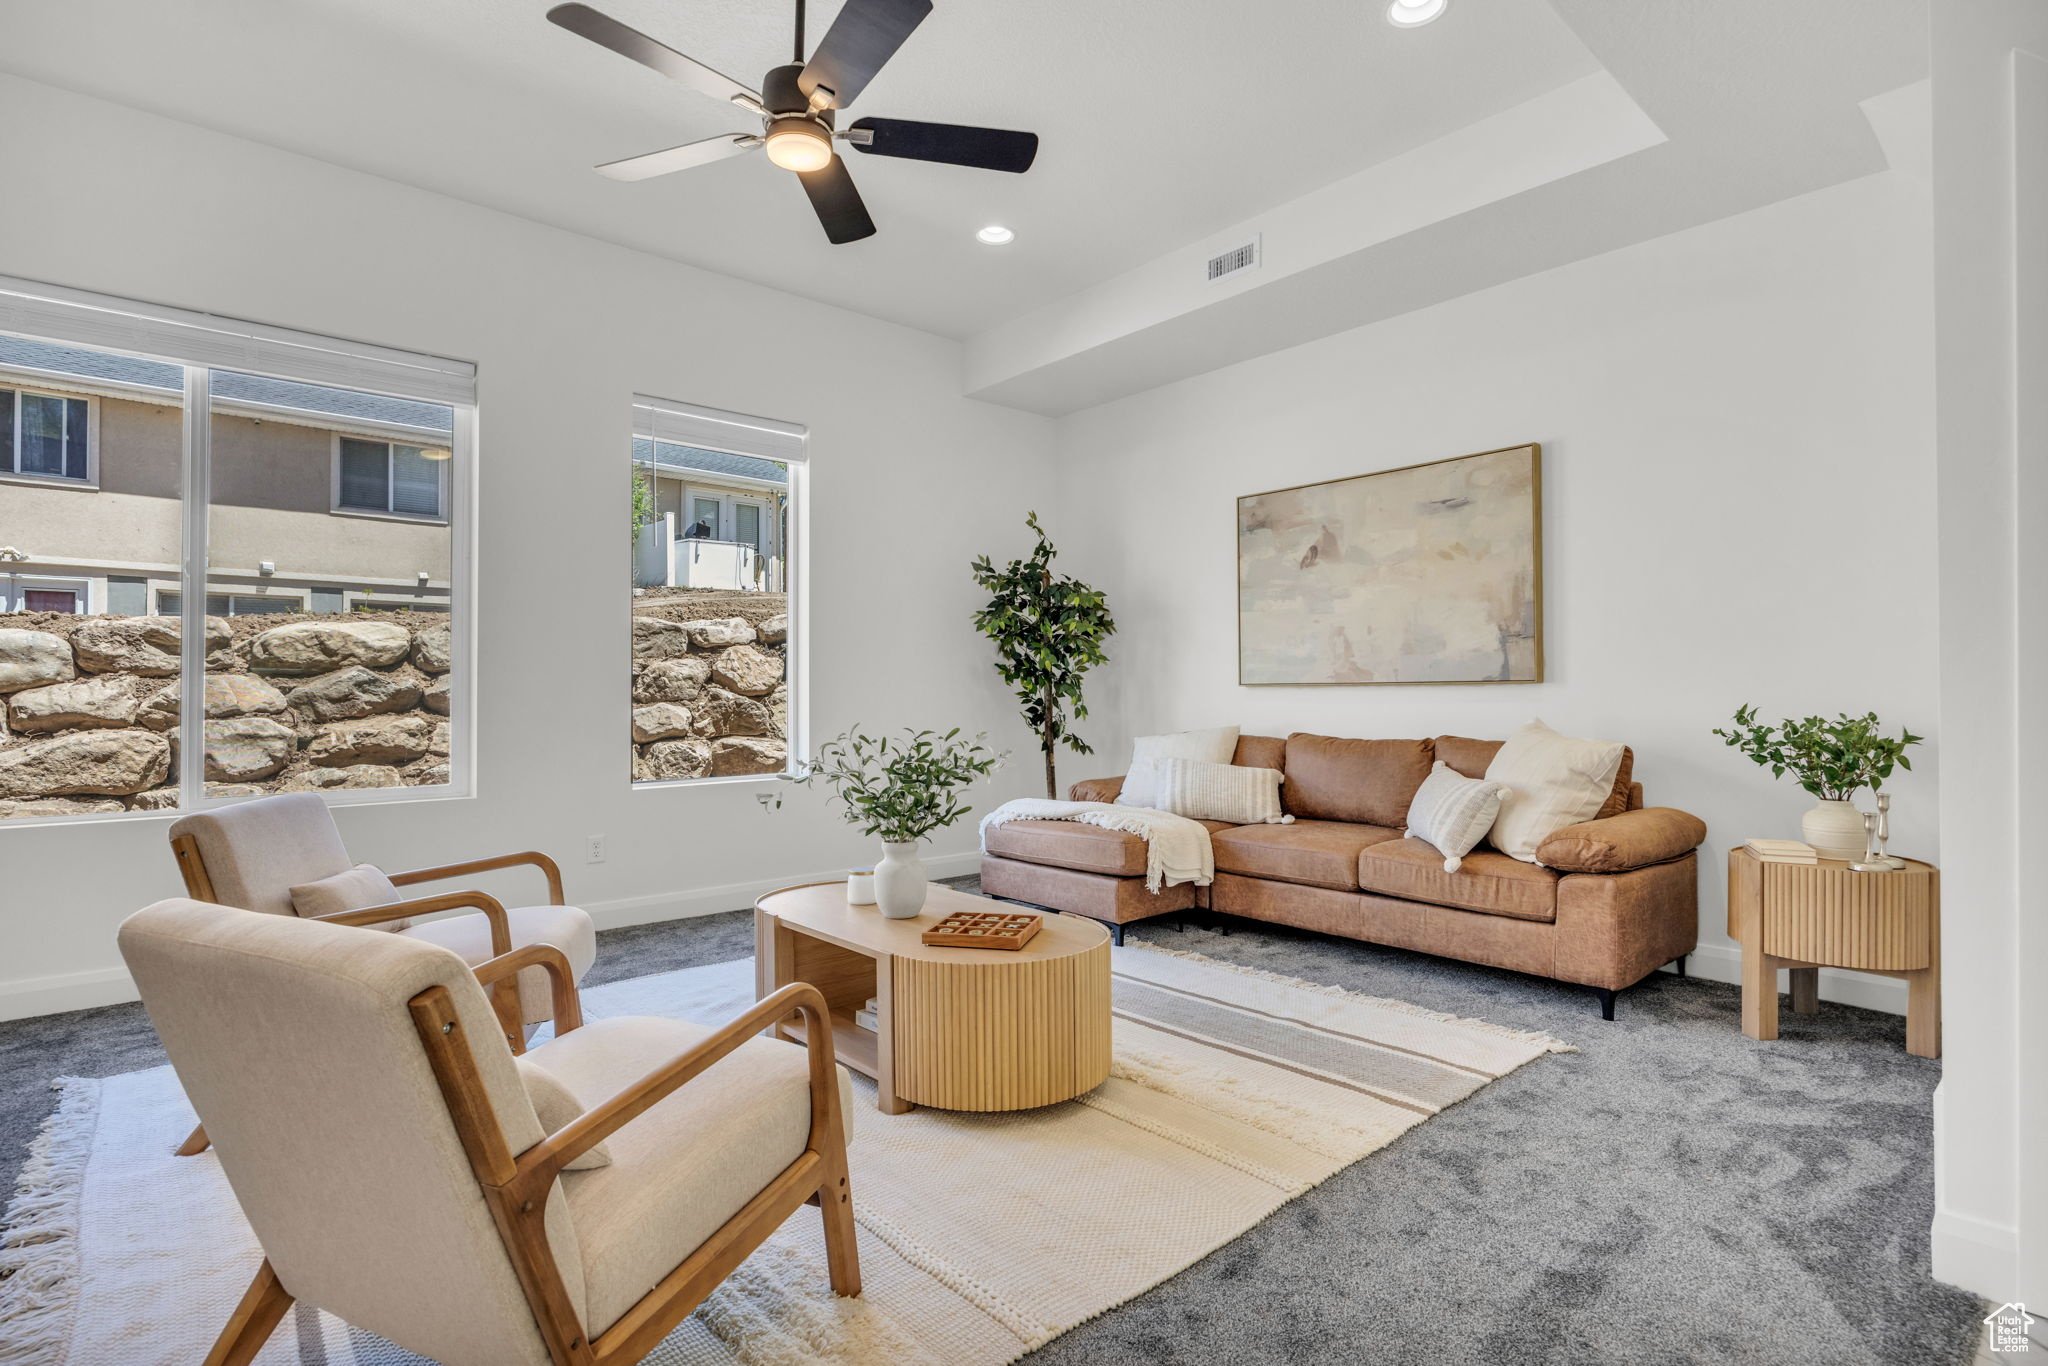 Living room with ceiling fan and carpet floors